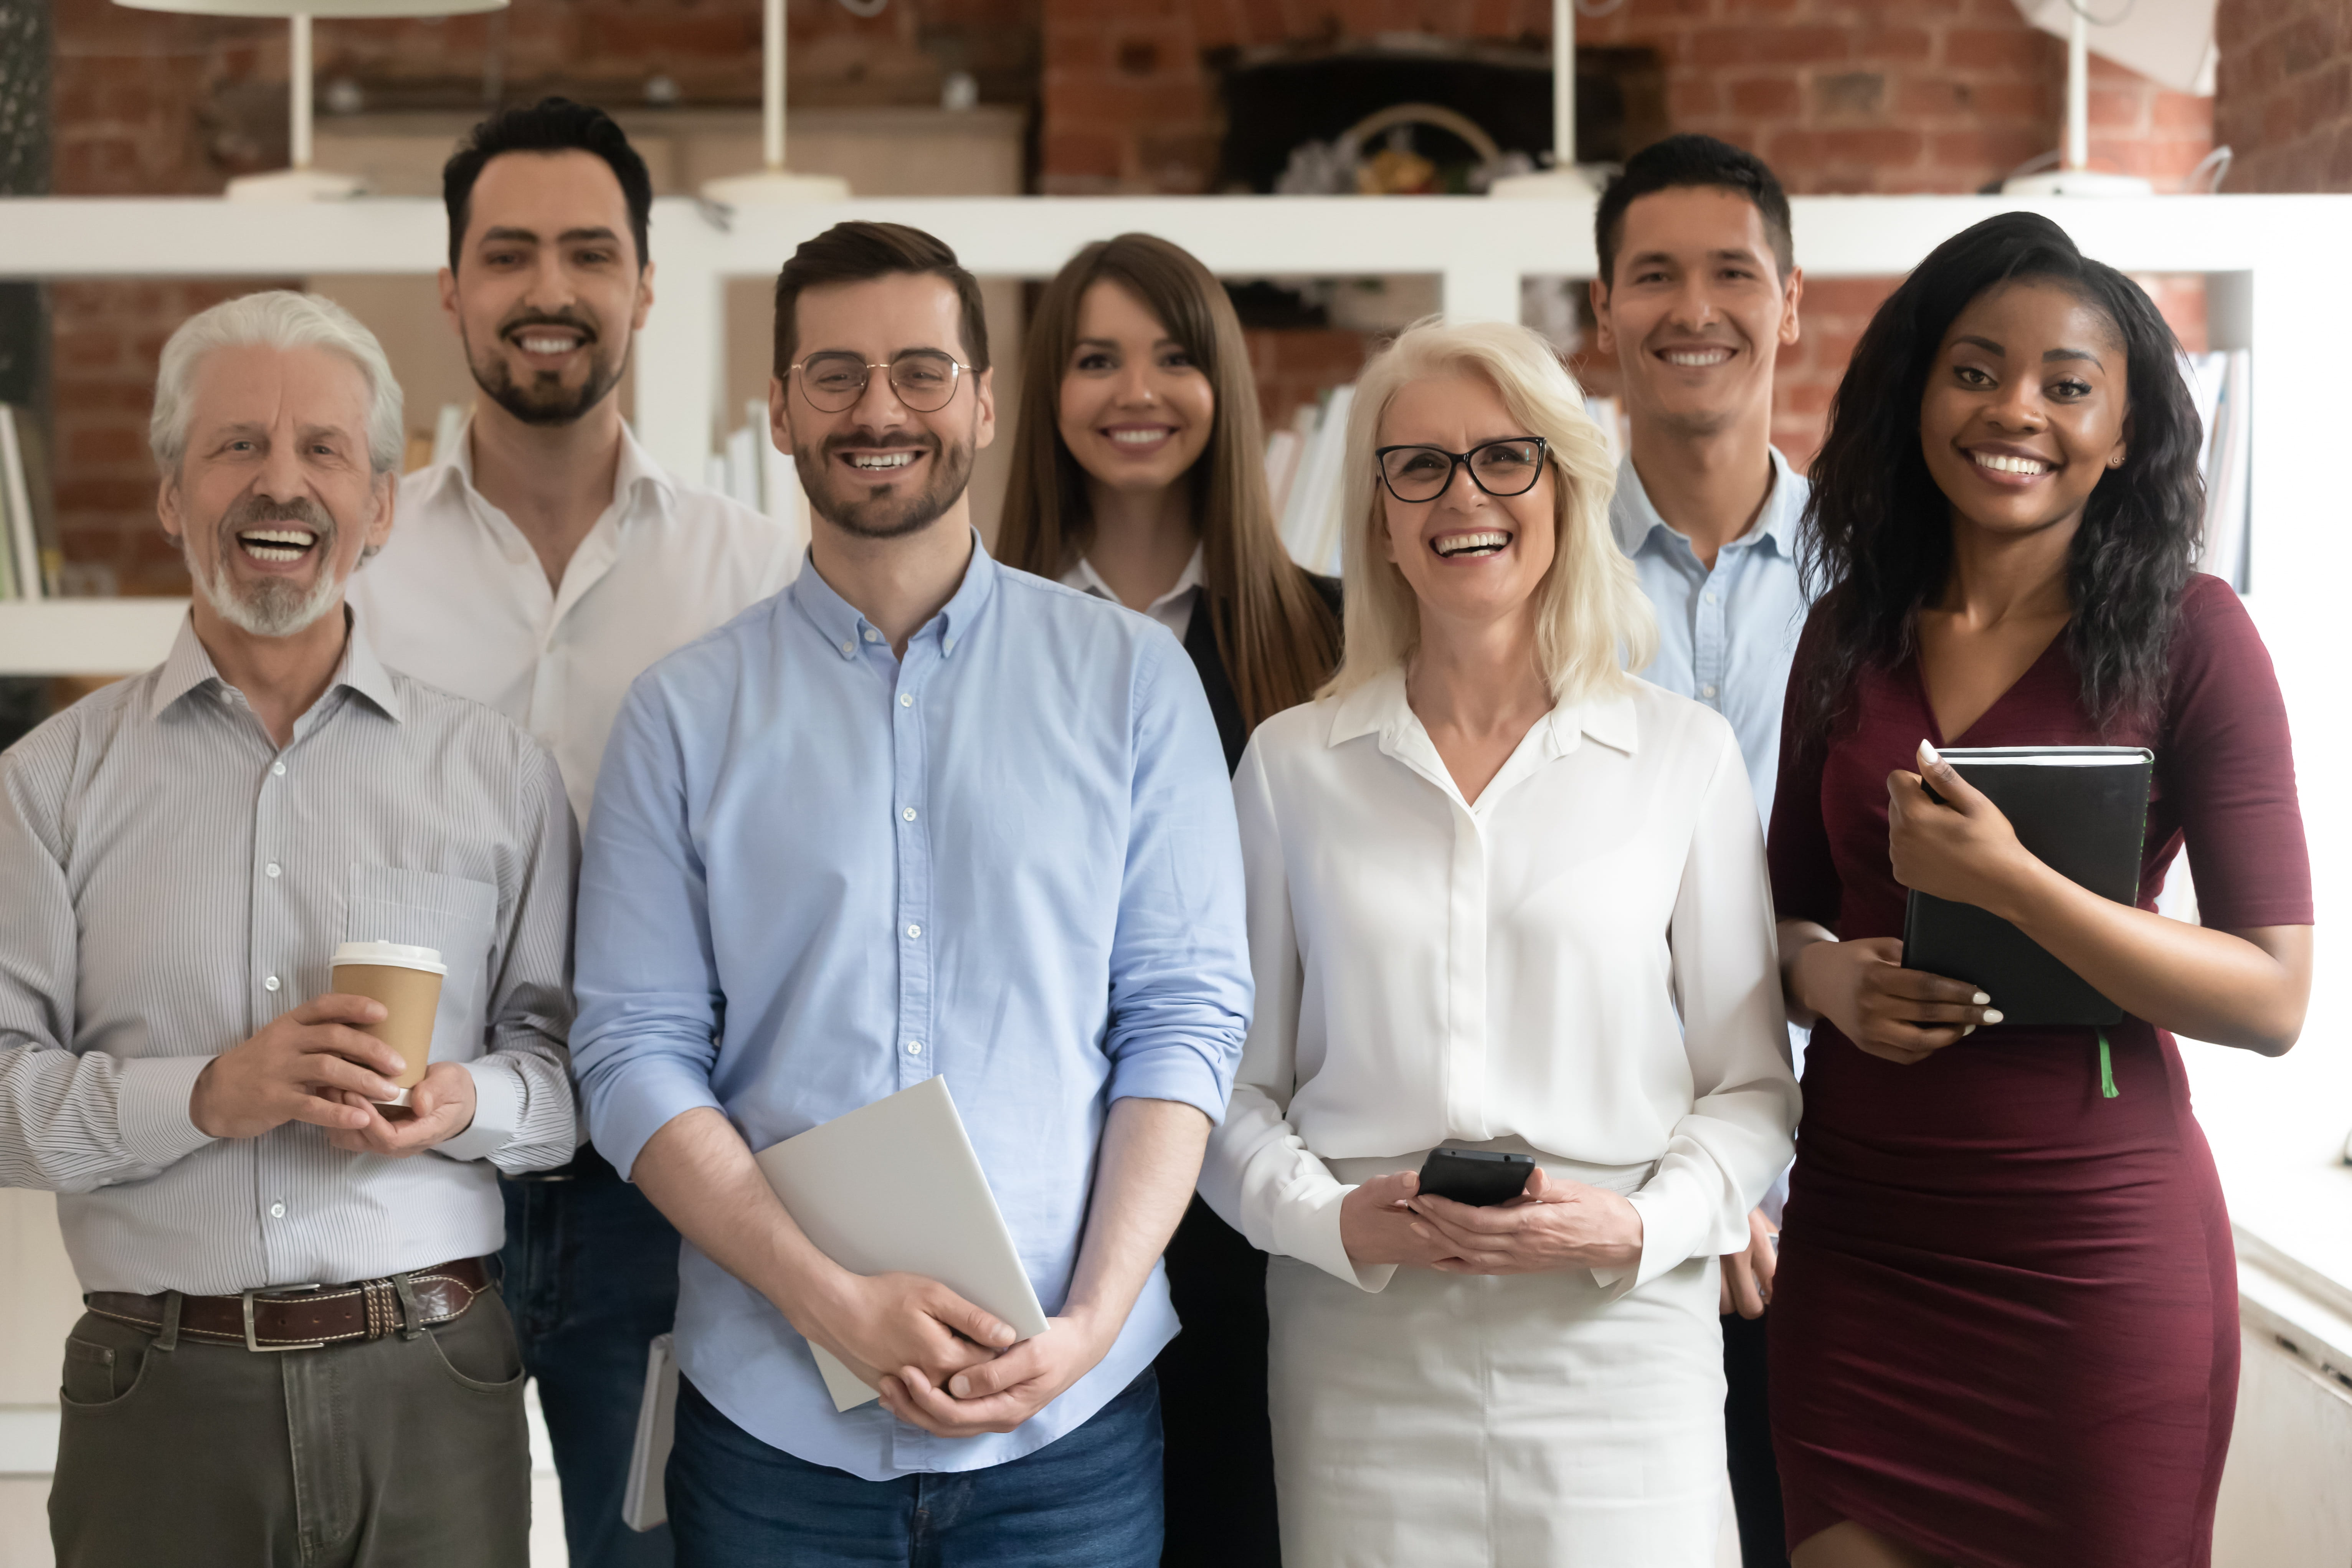 Diverse collection of individuals in business casual outfits standing in an office setting.